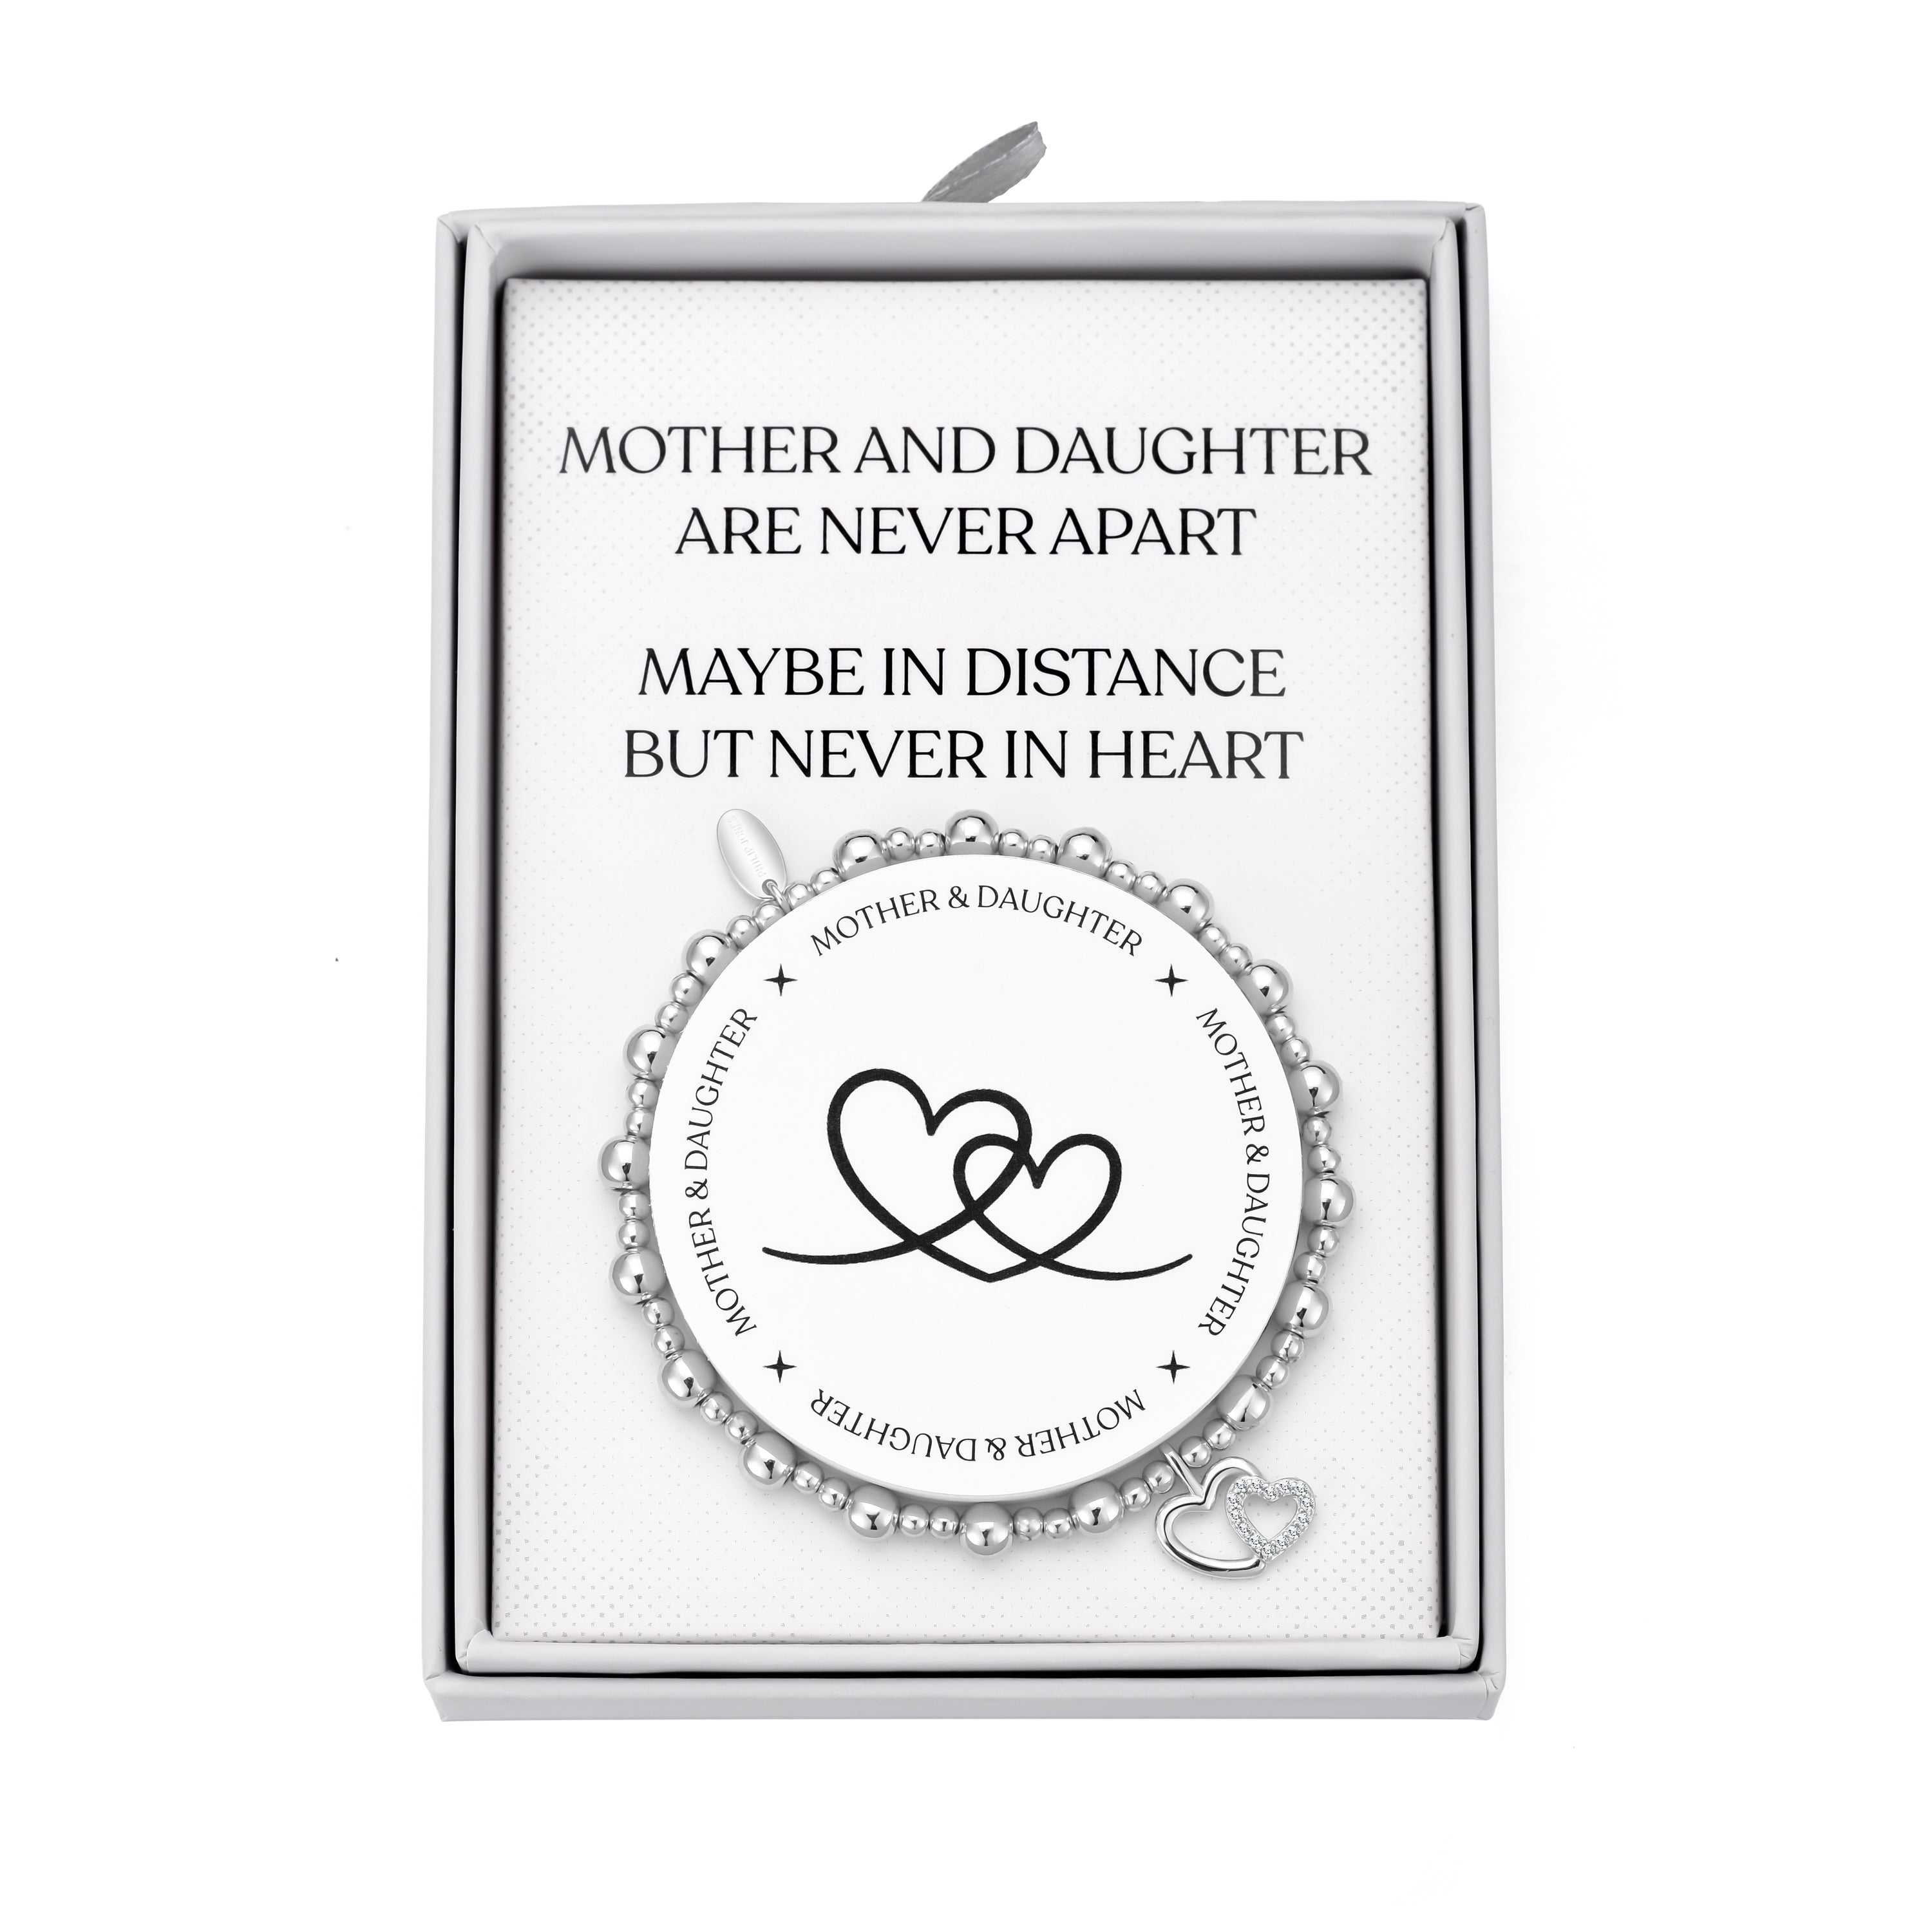 Silver Plated Mother and Daughter Quote Stretch Bracelet with Gift Box by Philip Jones Jewellery